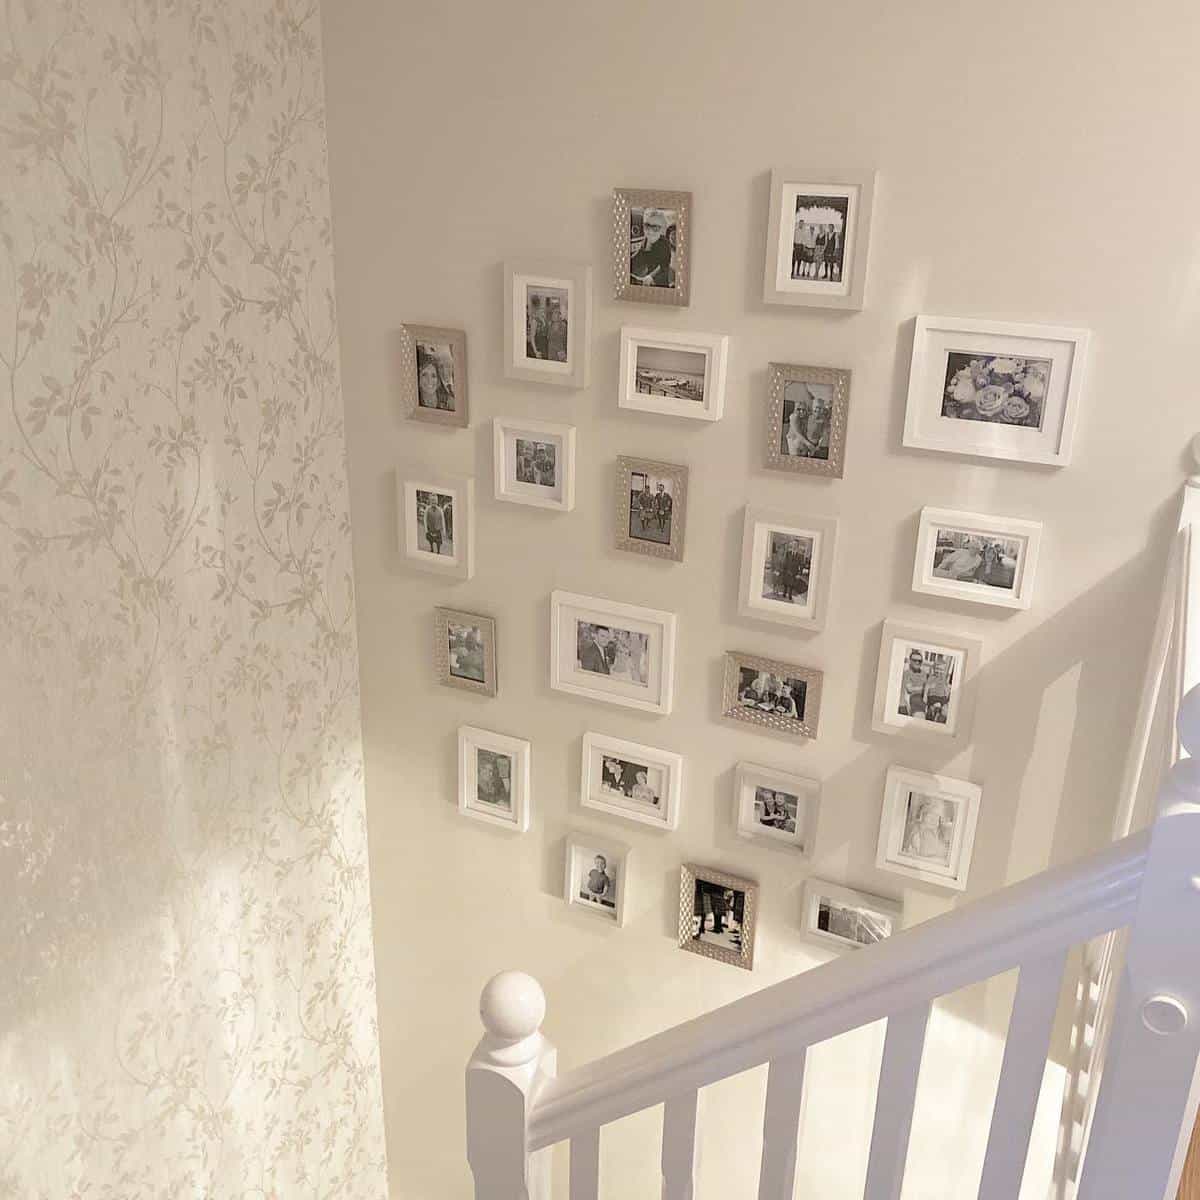 Framed photos on the wall near the stairs 